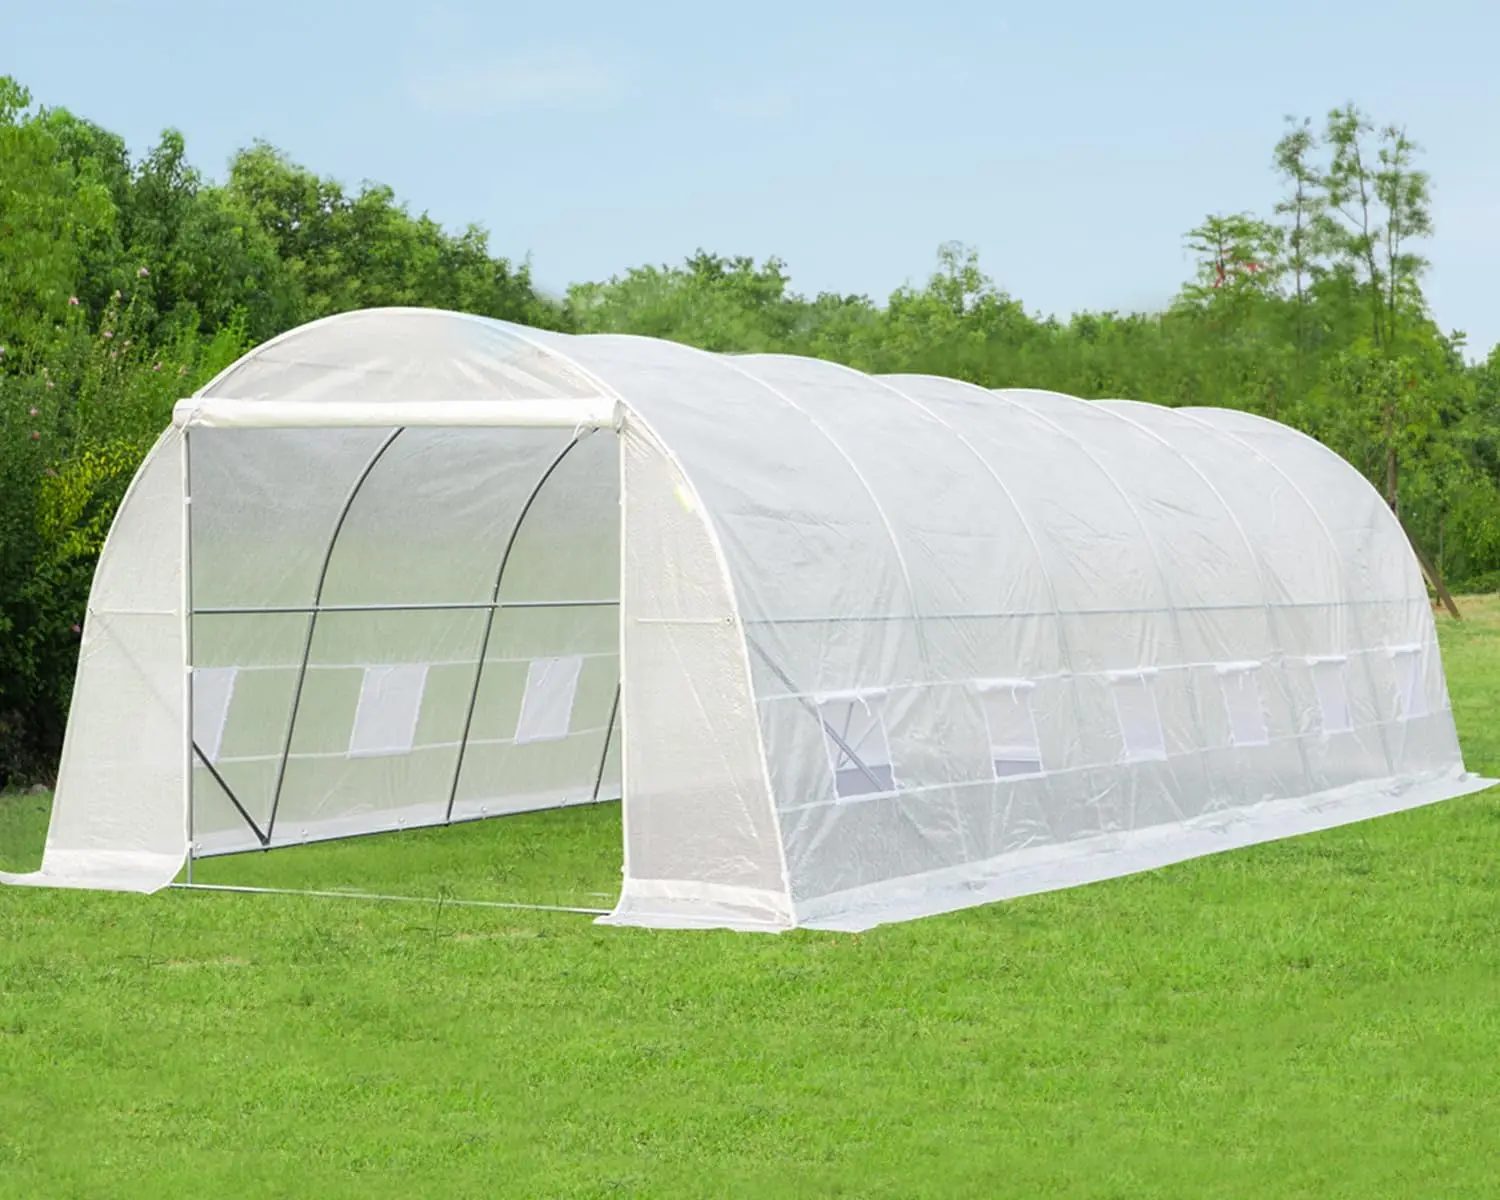 

26' x 10' x 7' Greenhouse Large Gardening Plant Hot House Portable Walking in Tunnel Tent, Green House for Outside Winter Heavy